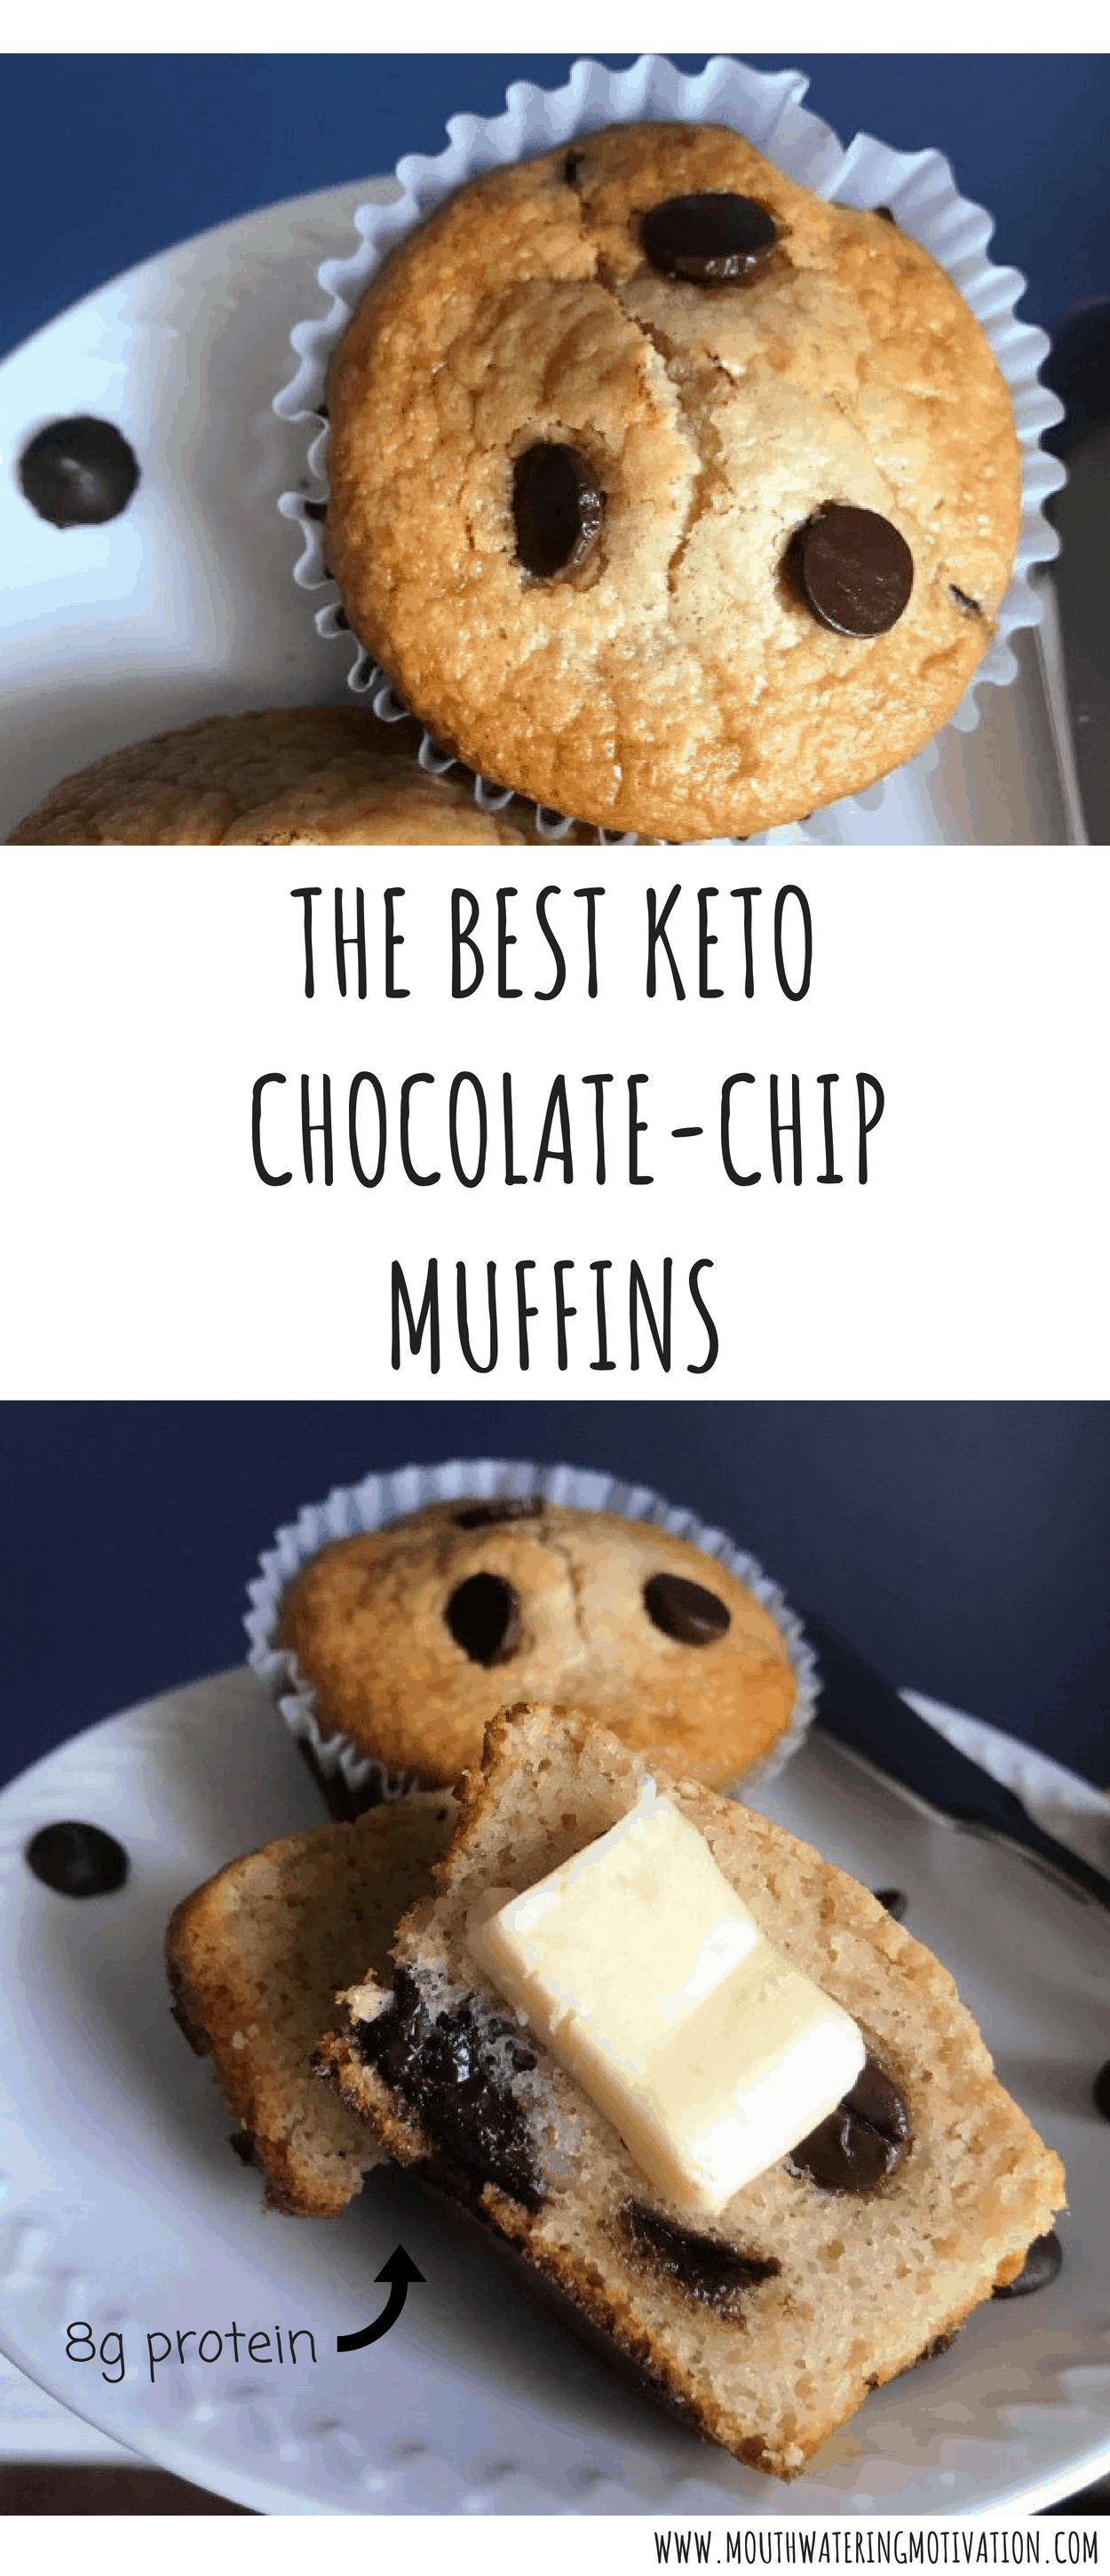 THE BEST KETO CHOCOLATE-CHIP MUFFINS (3)